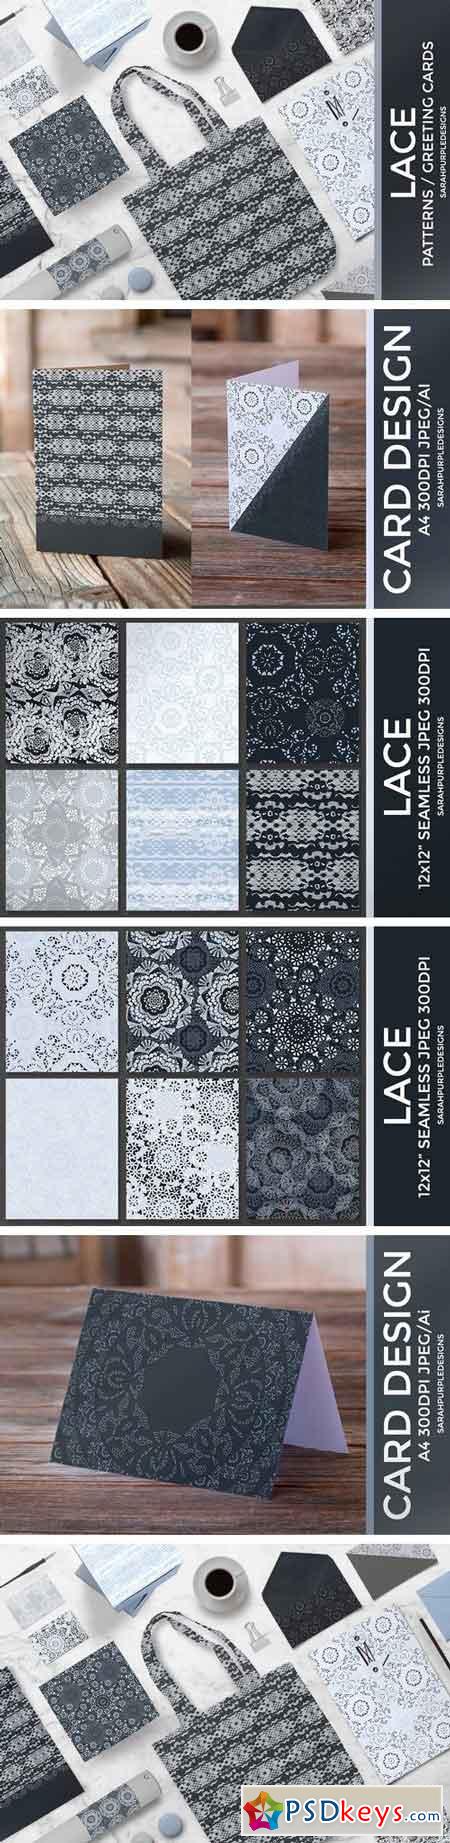 Lace Seamless Vector Patterns 954882